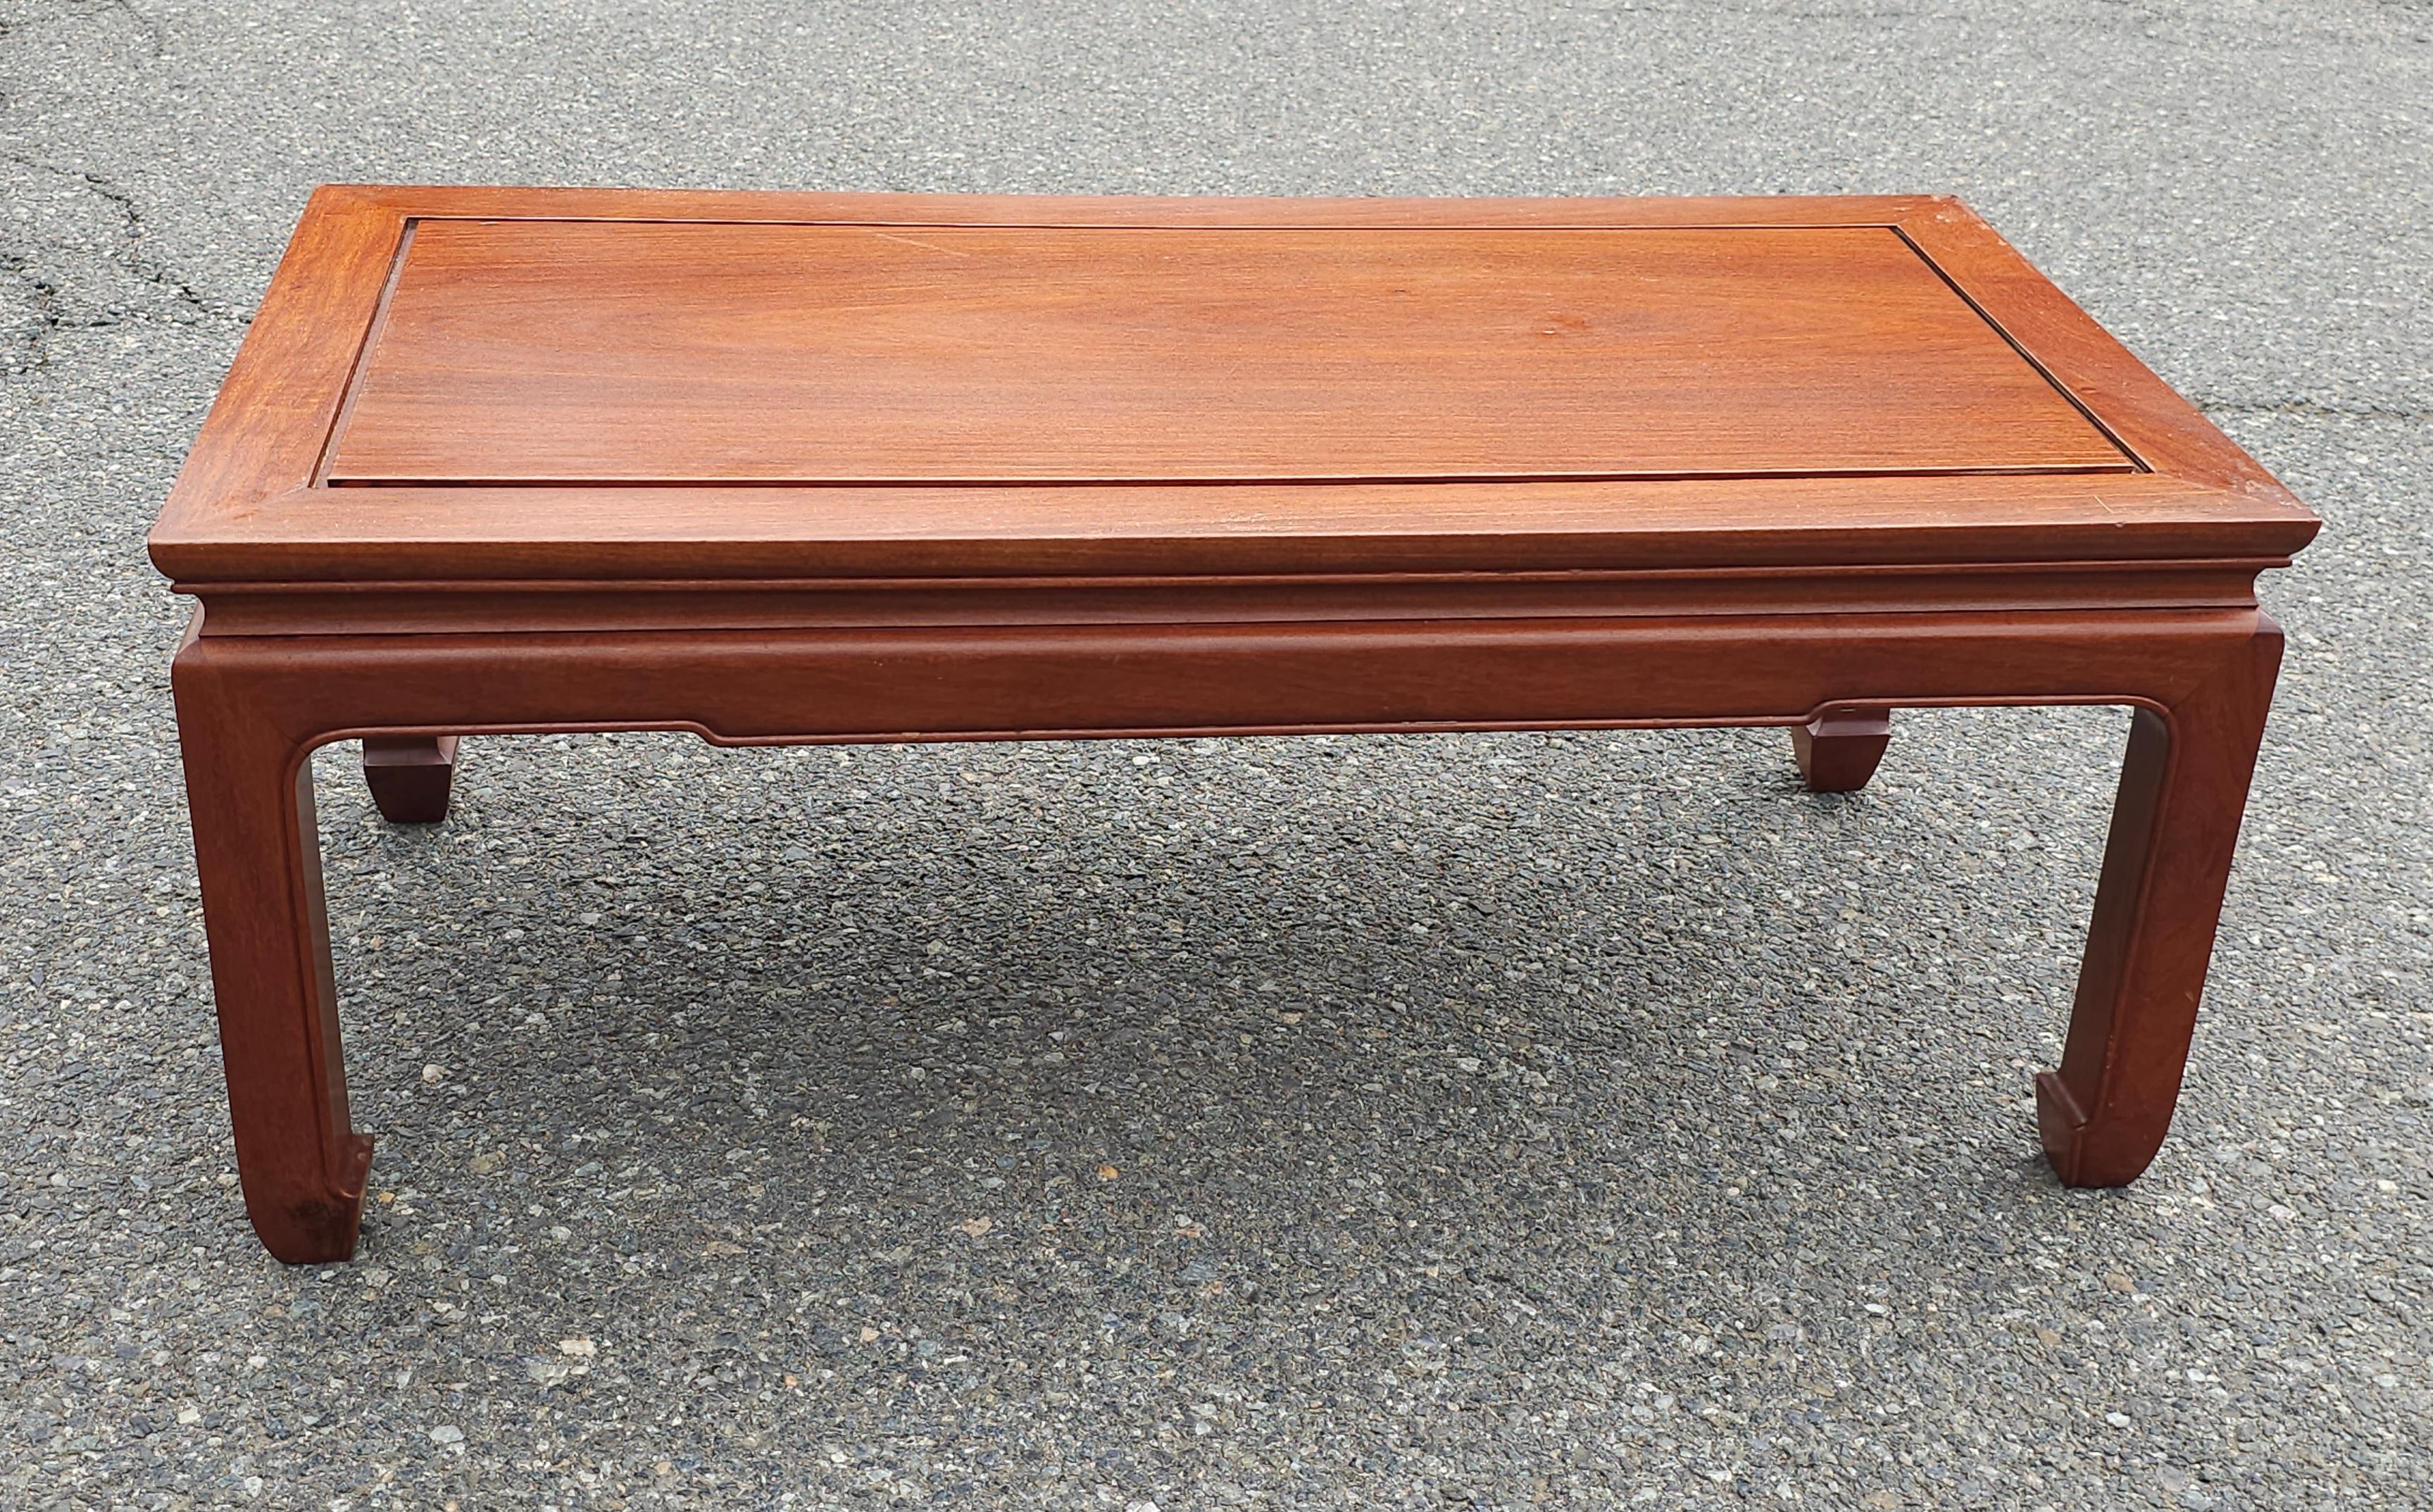 An exquisite Mid 20th Century Ming Style Rosewood cocktail  Table with protective Glass Top. Pristine vintage condition with very light signs of use.

Measures 40